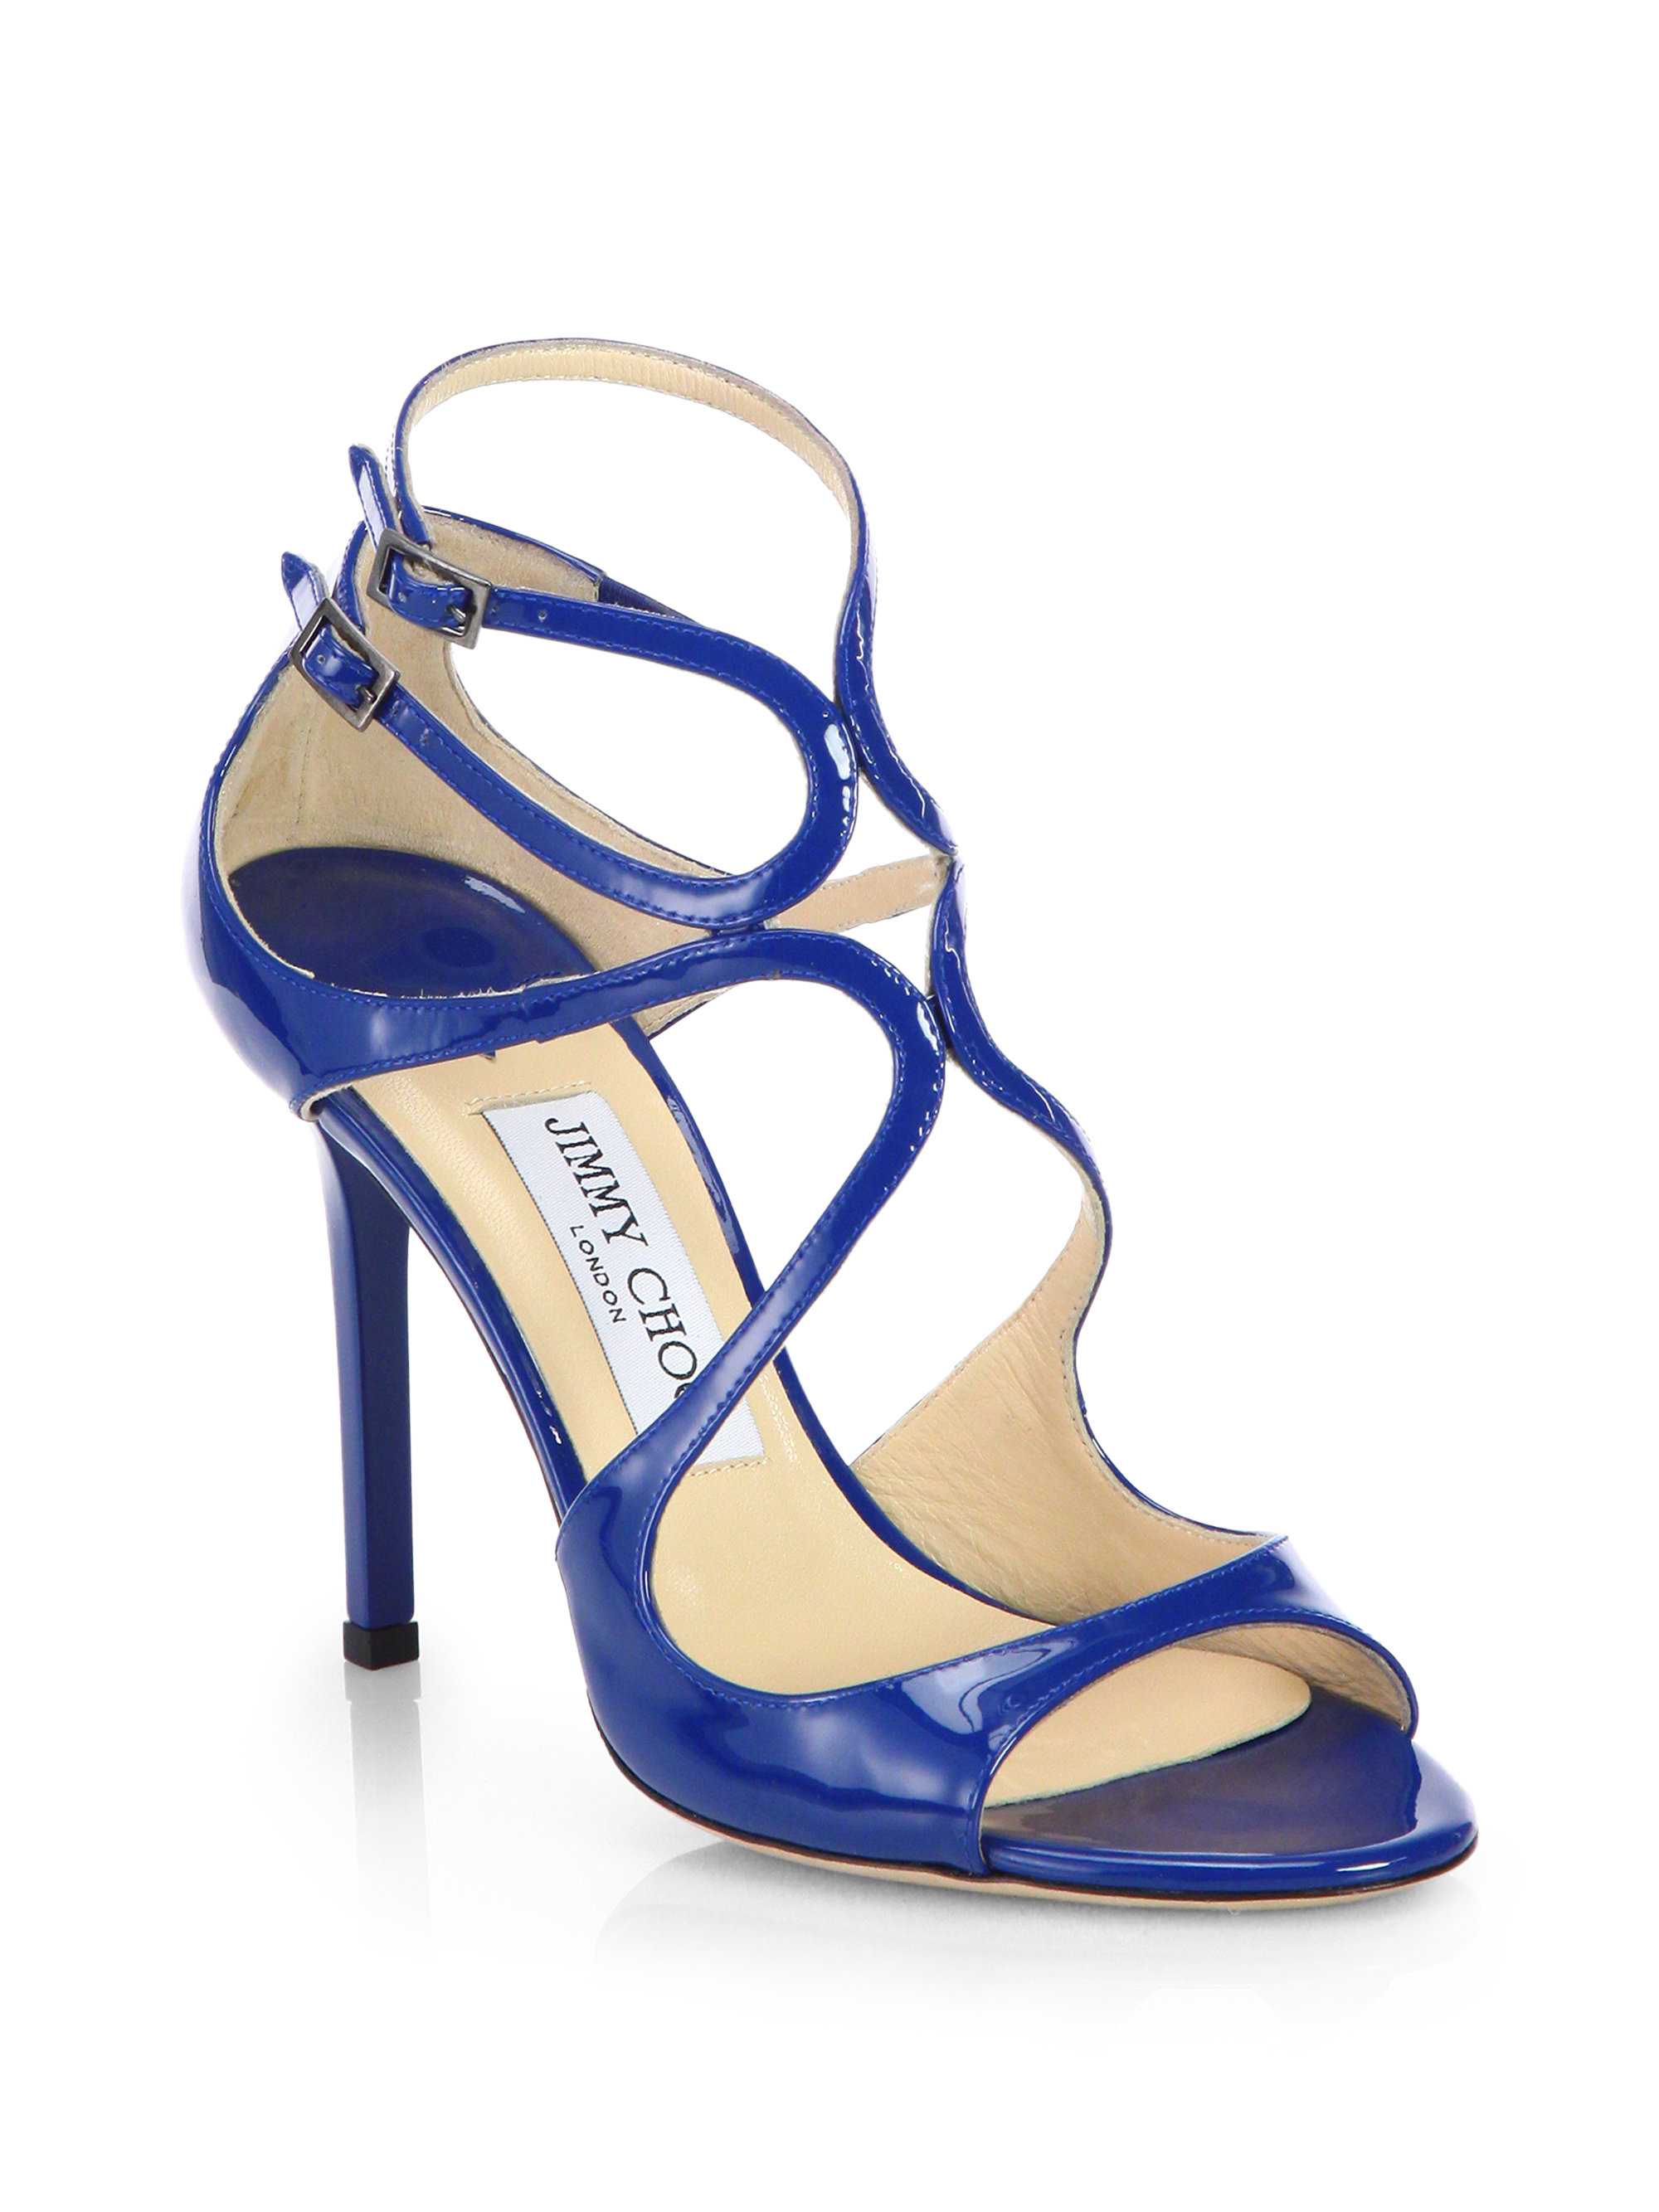 Jimmy choo Lang Strappy Patent Leather Sandals in Blue | Lyst